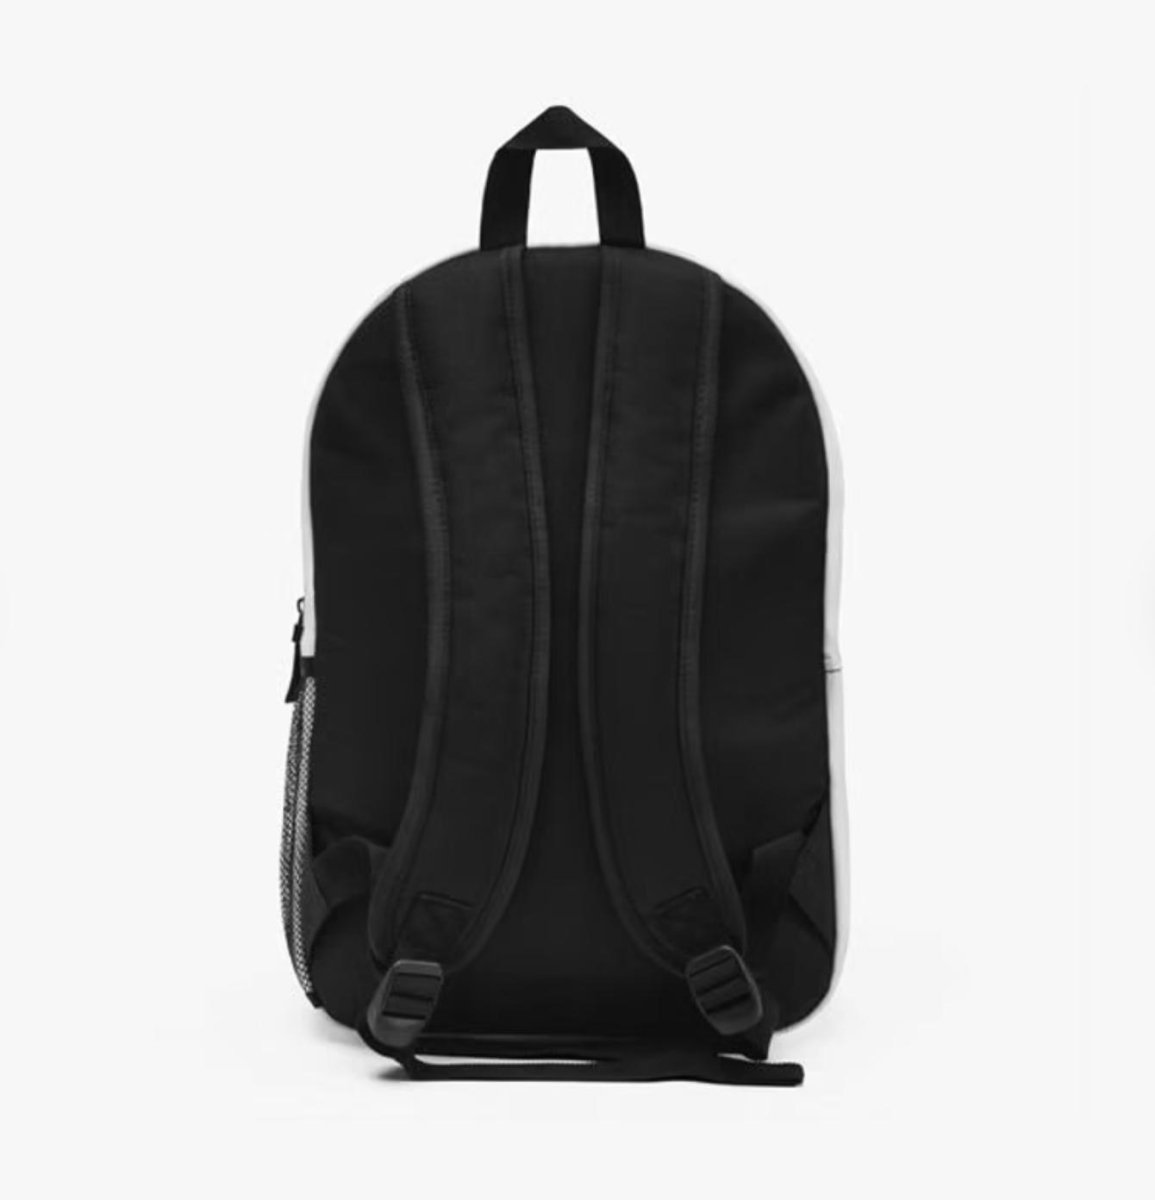 Fashion Decades Backpack - The Trini Gee